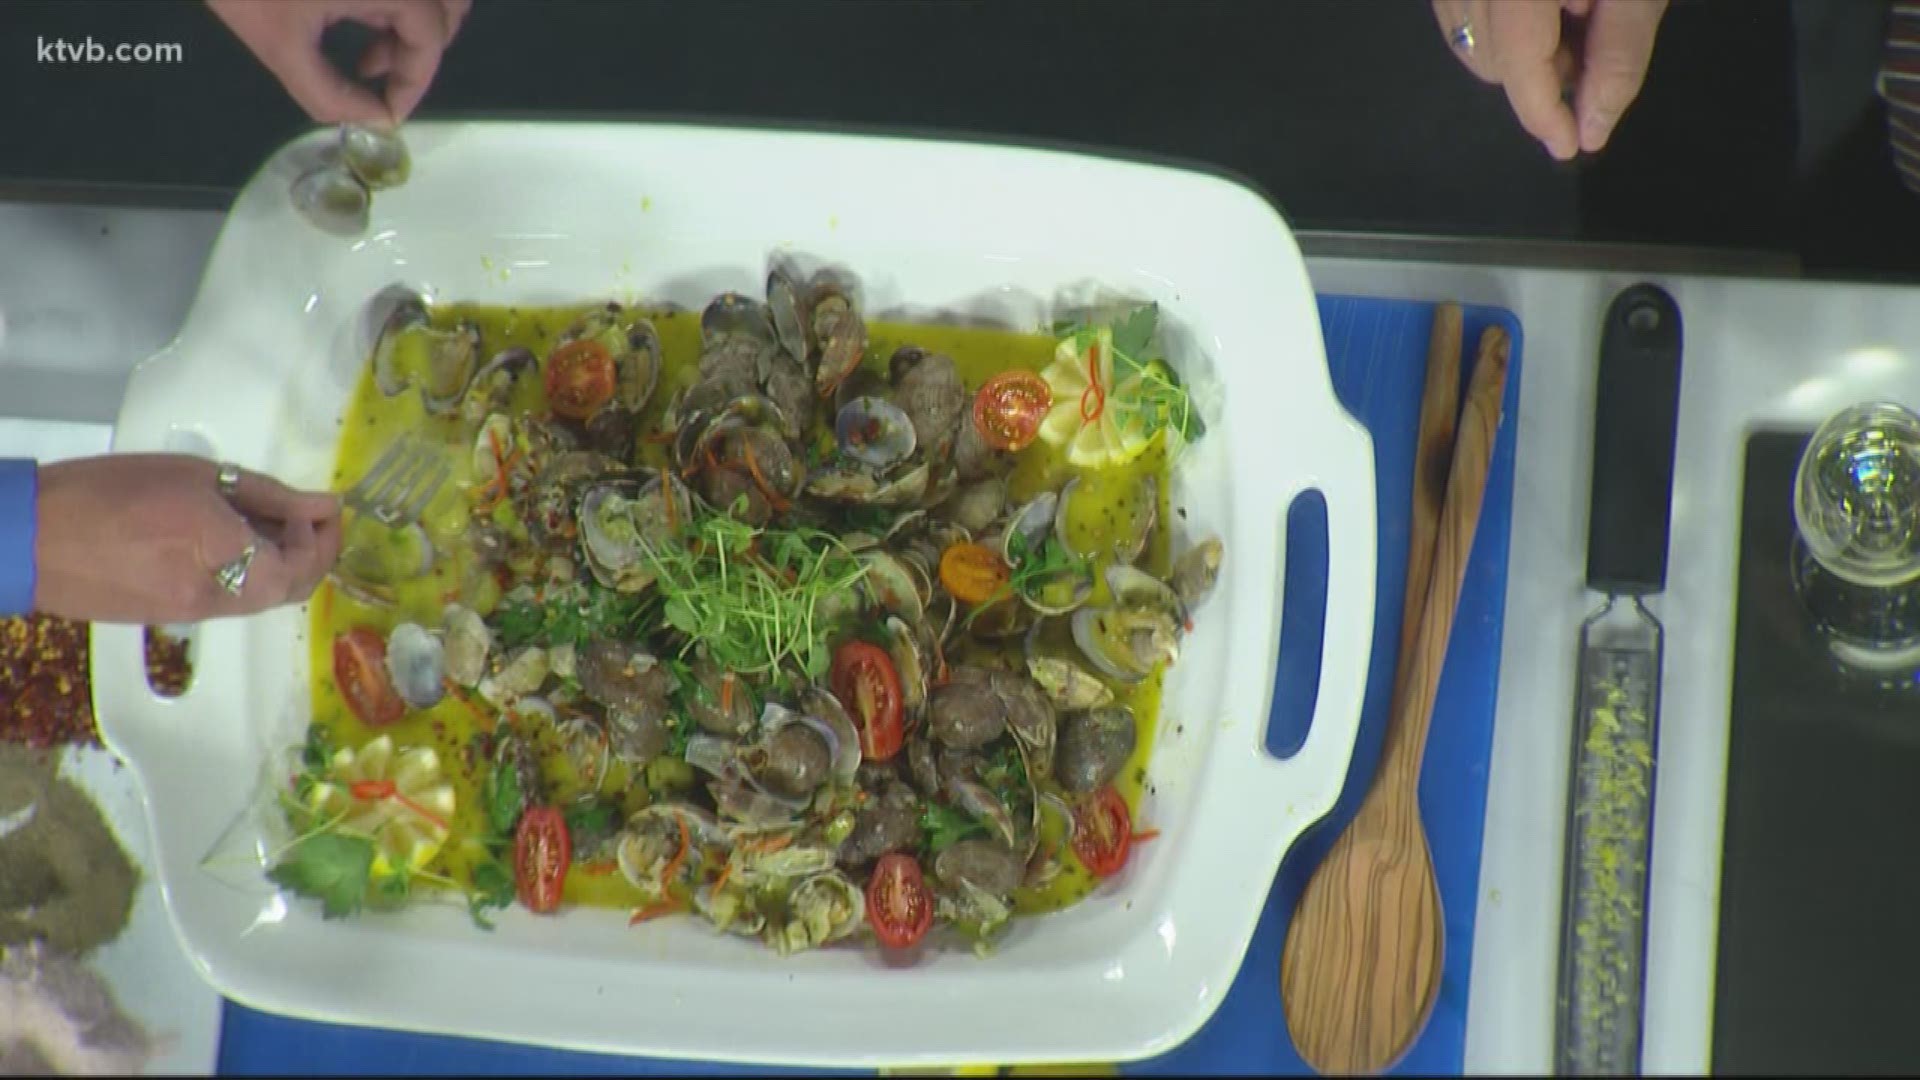 Chef Franck Bacquet from Bacquet’s Restaurant shows how to make clams with vegetables.